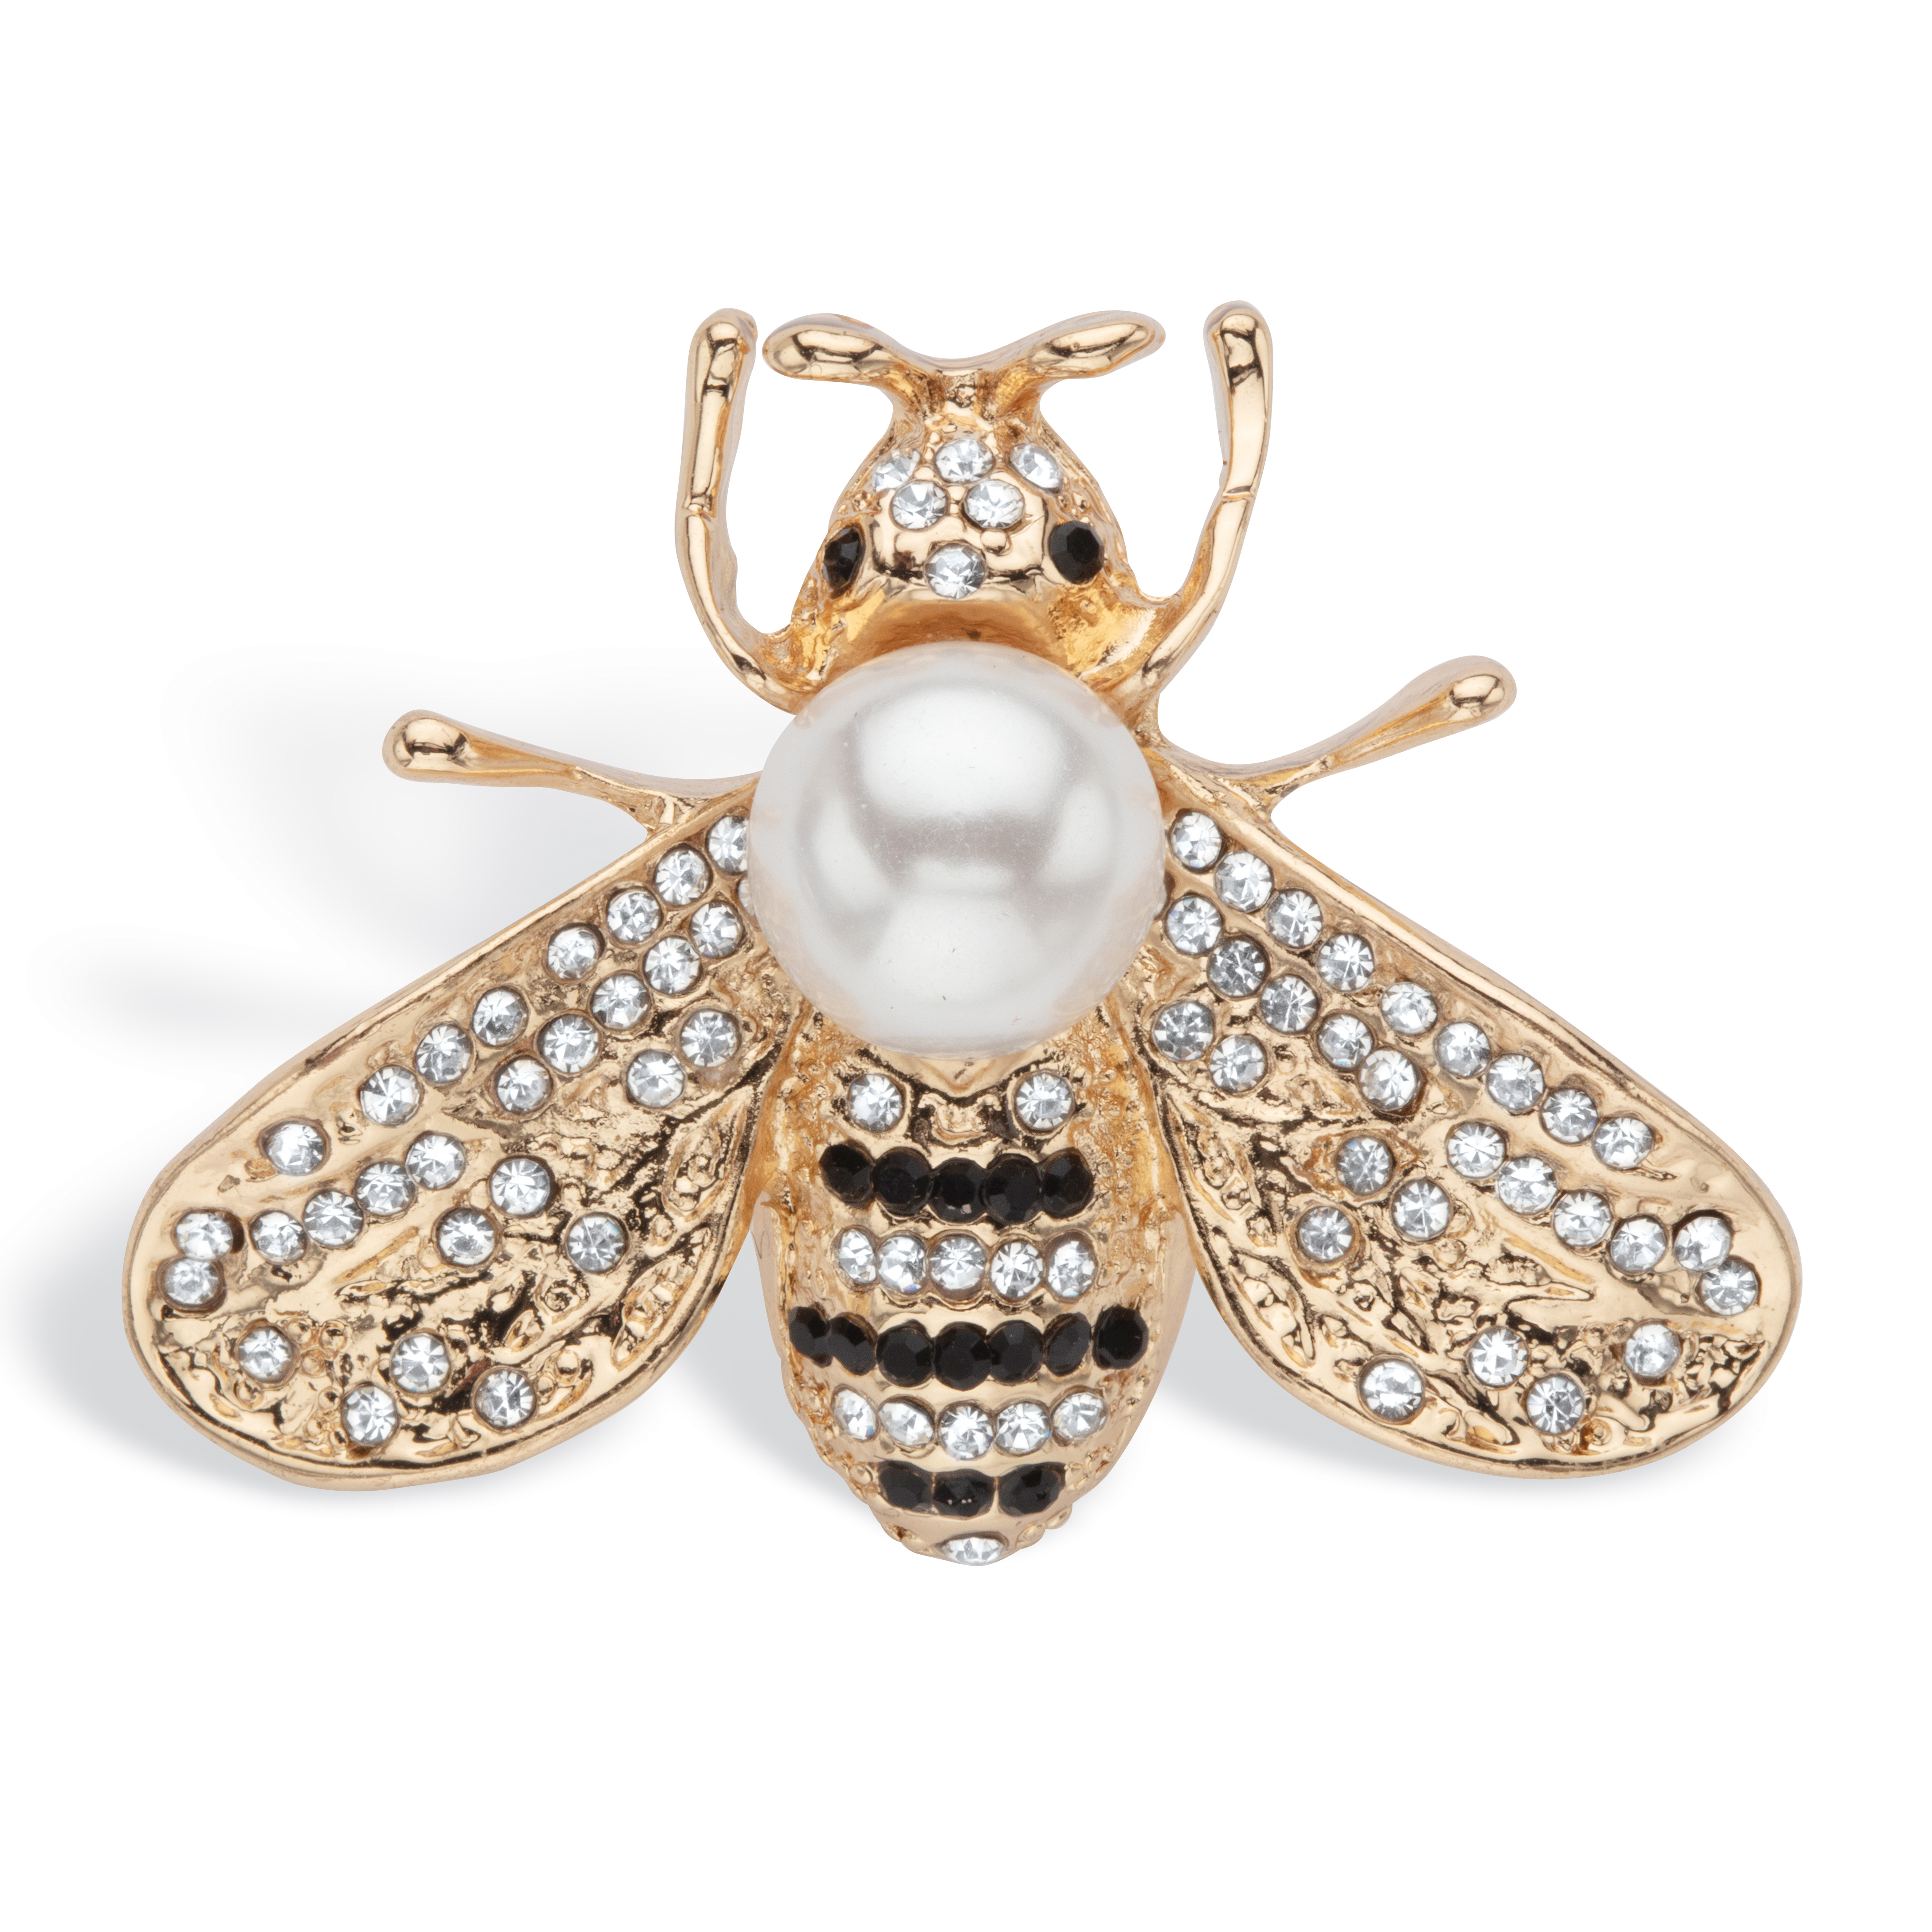 PalmBeach Jewelry Round Black and White Crystal Bee Pin With Simulated Pearl Goldtone 1 1/4" Length